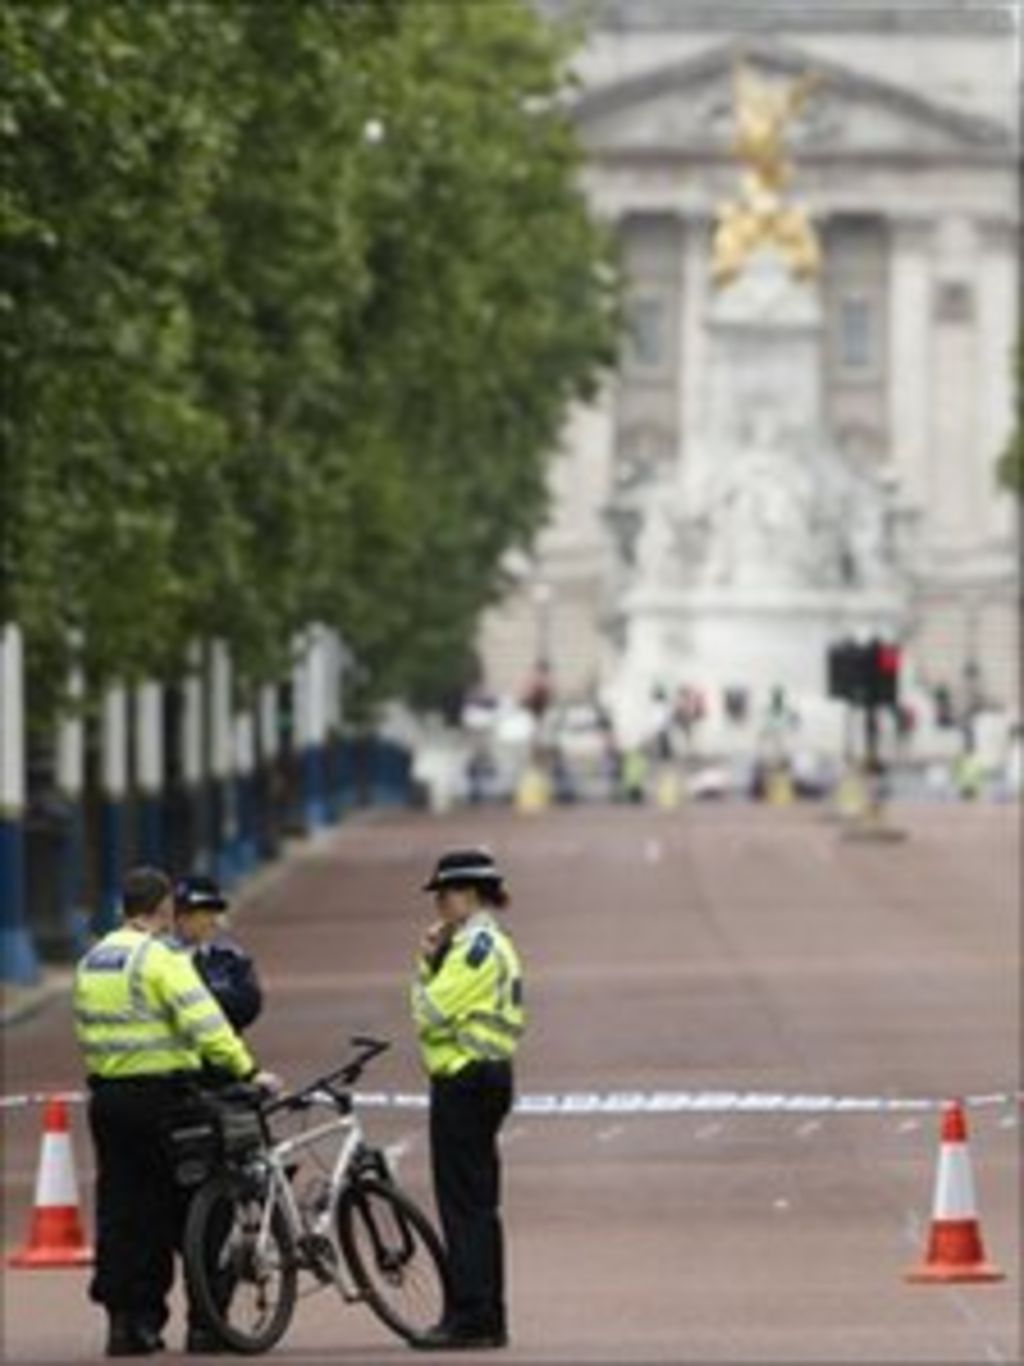 Bomb warning received in London